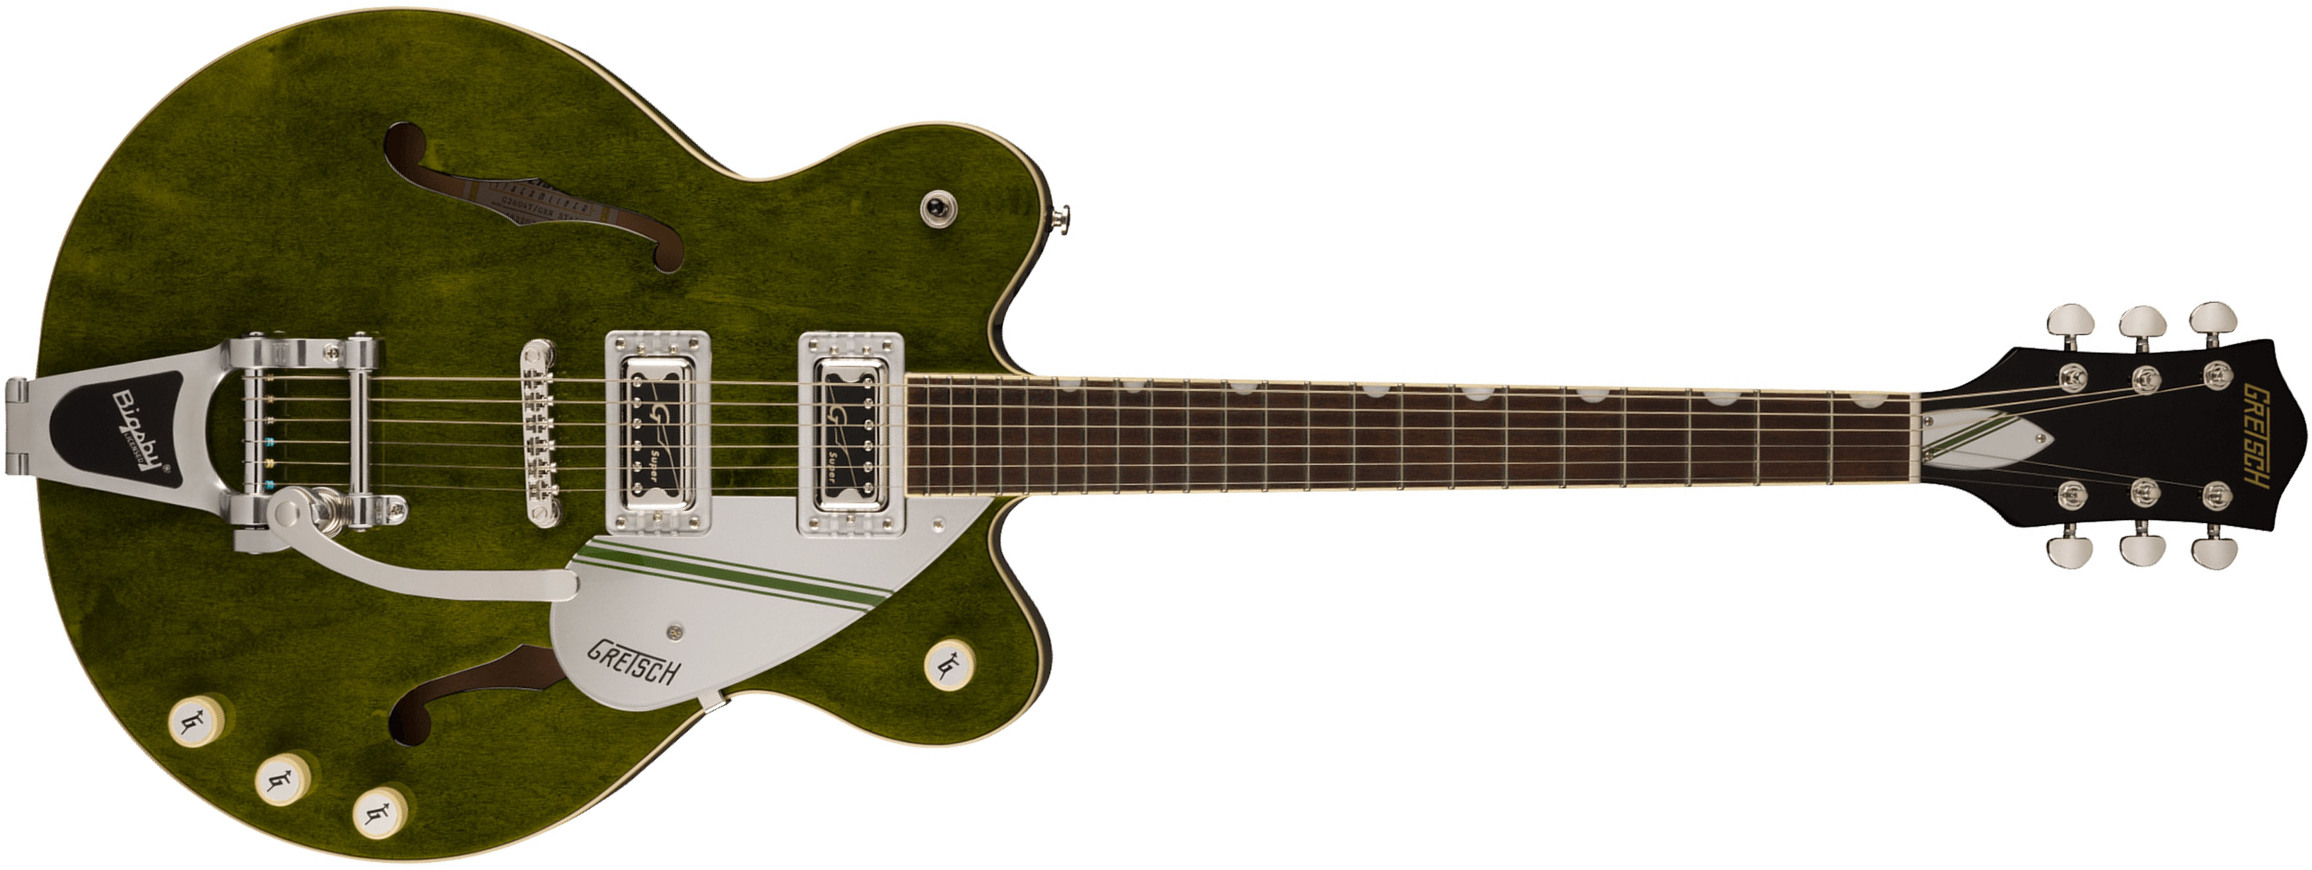 Gretsch G2604t Streamliner Rally Ii Center Block Dc Bigsby 2h Trem Lau - Rally Green Stain - Semi-Hollow E-Gitarre - Main picture